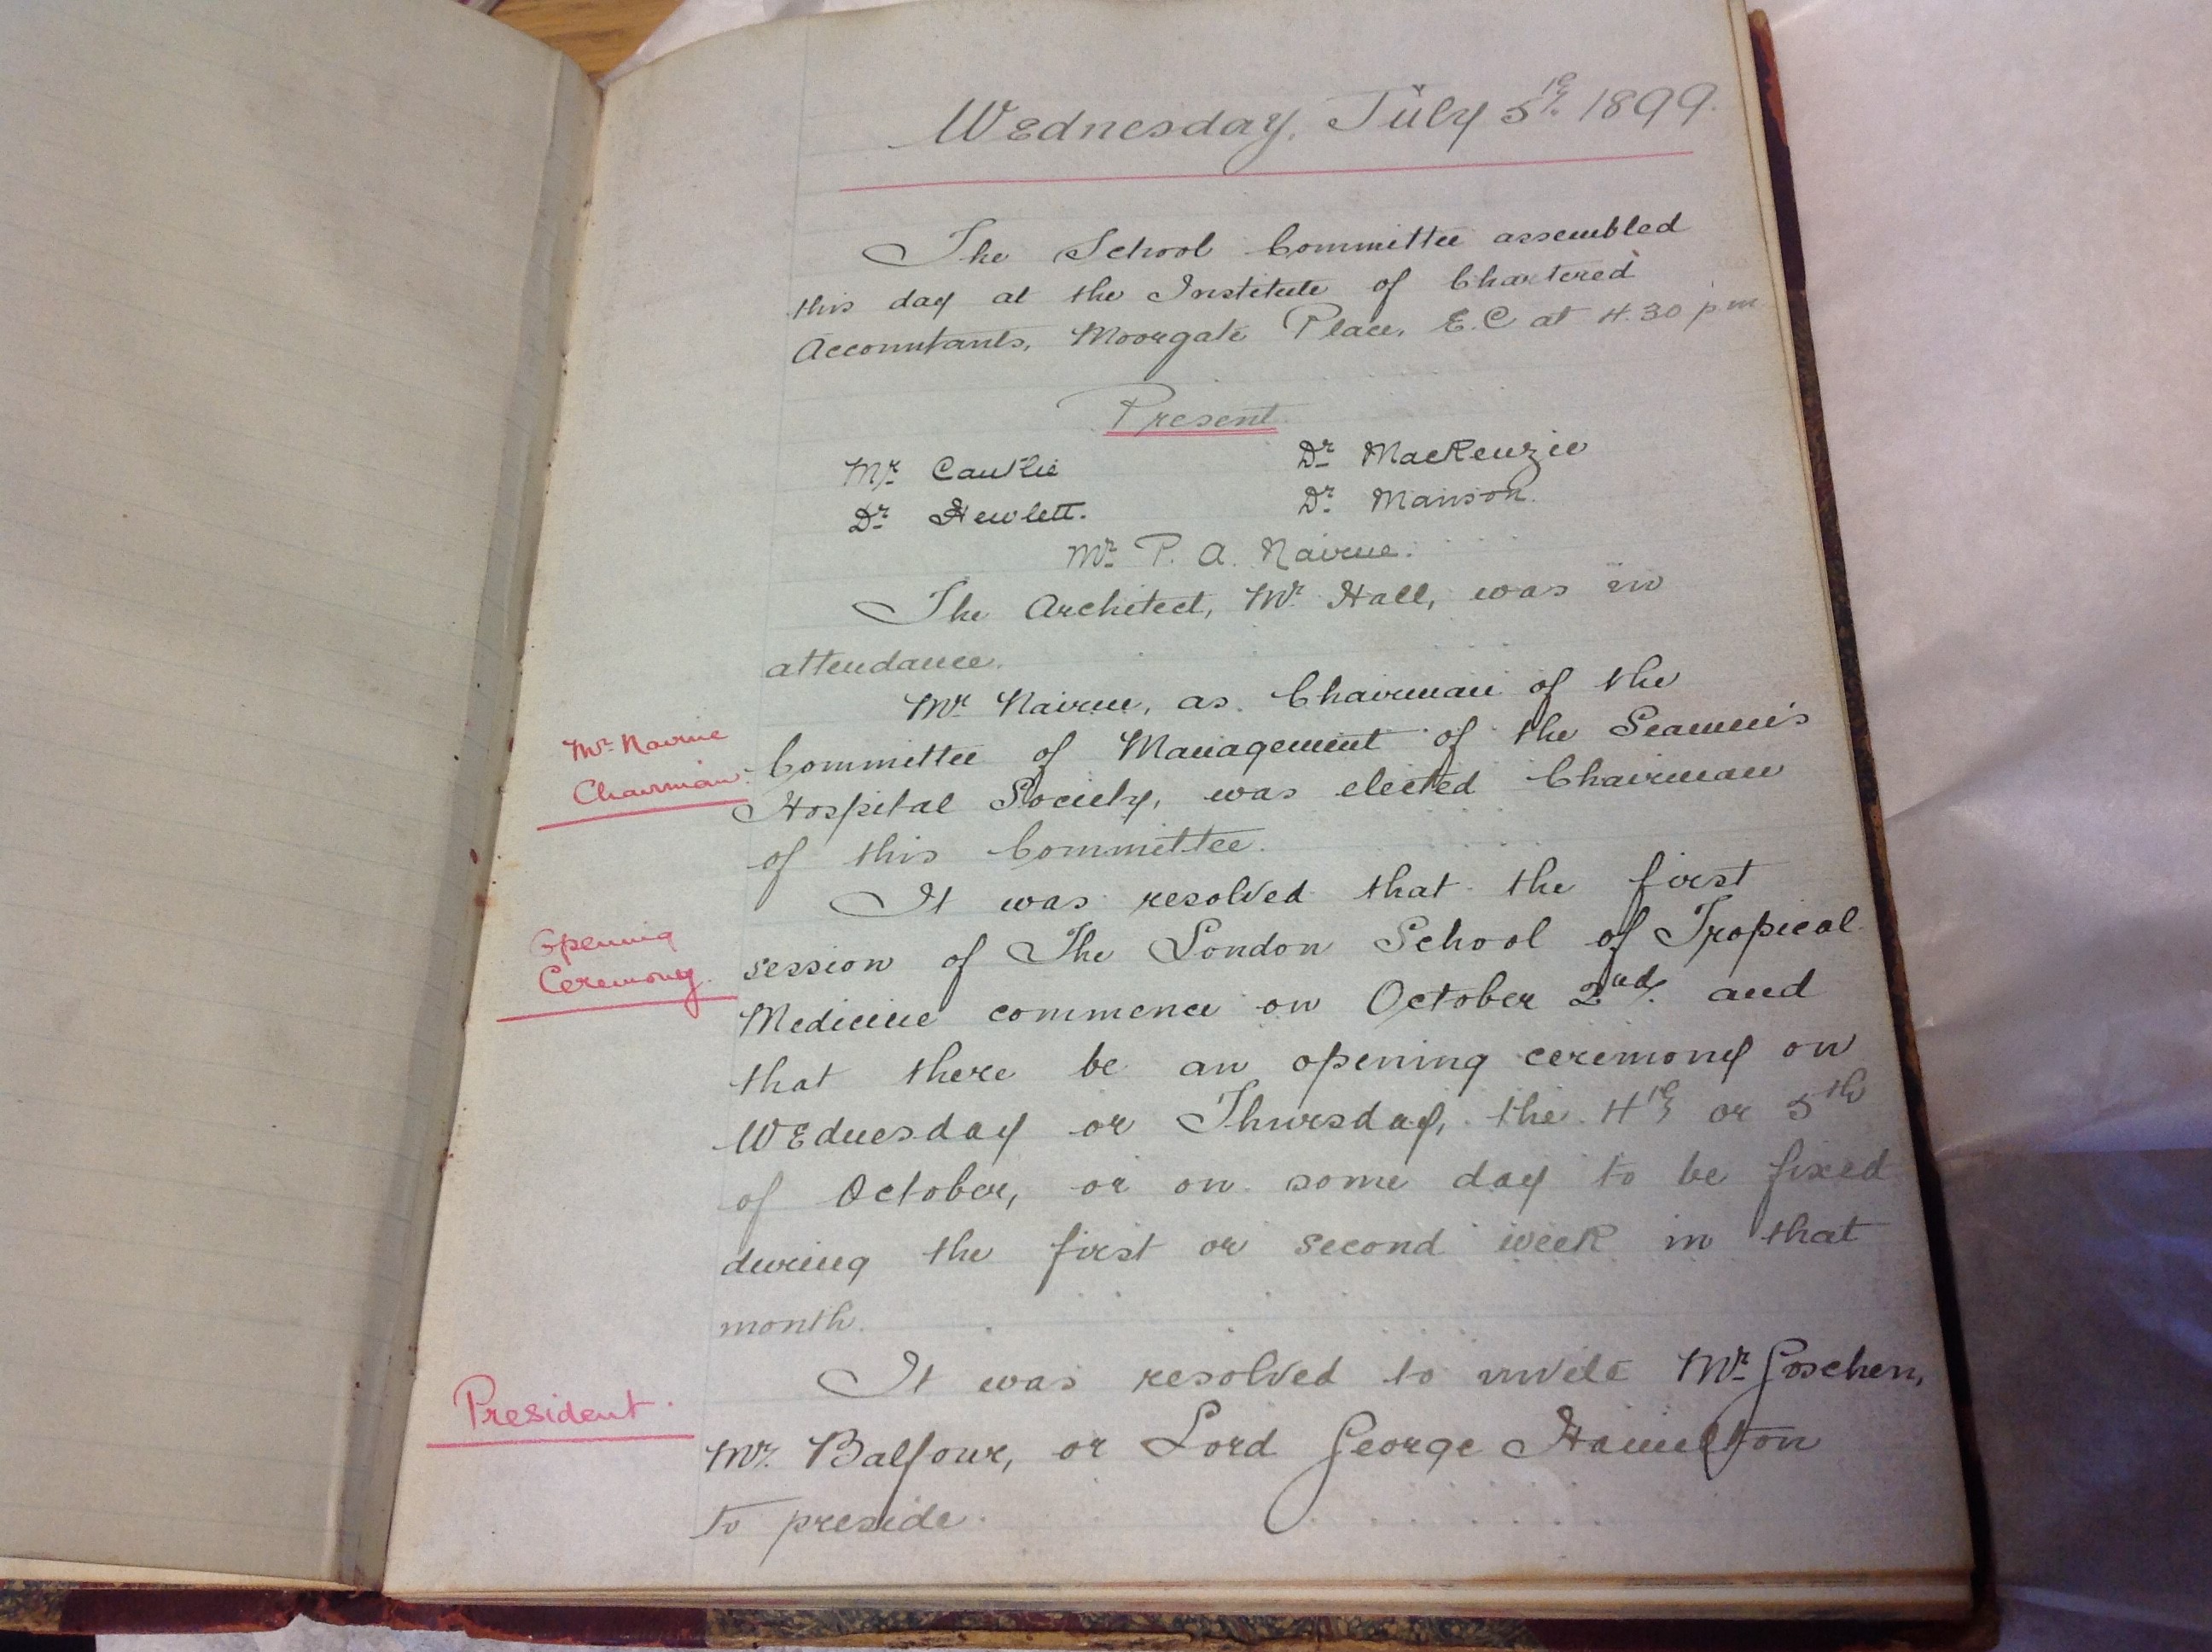 First page of minutes